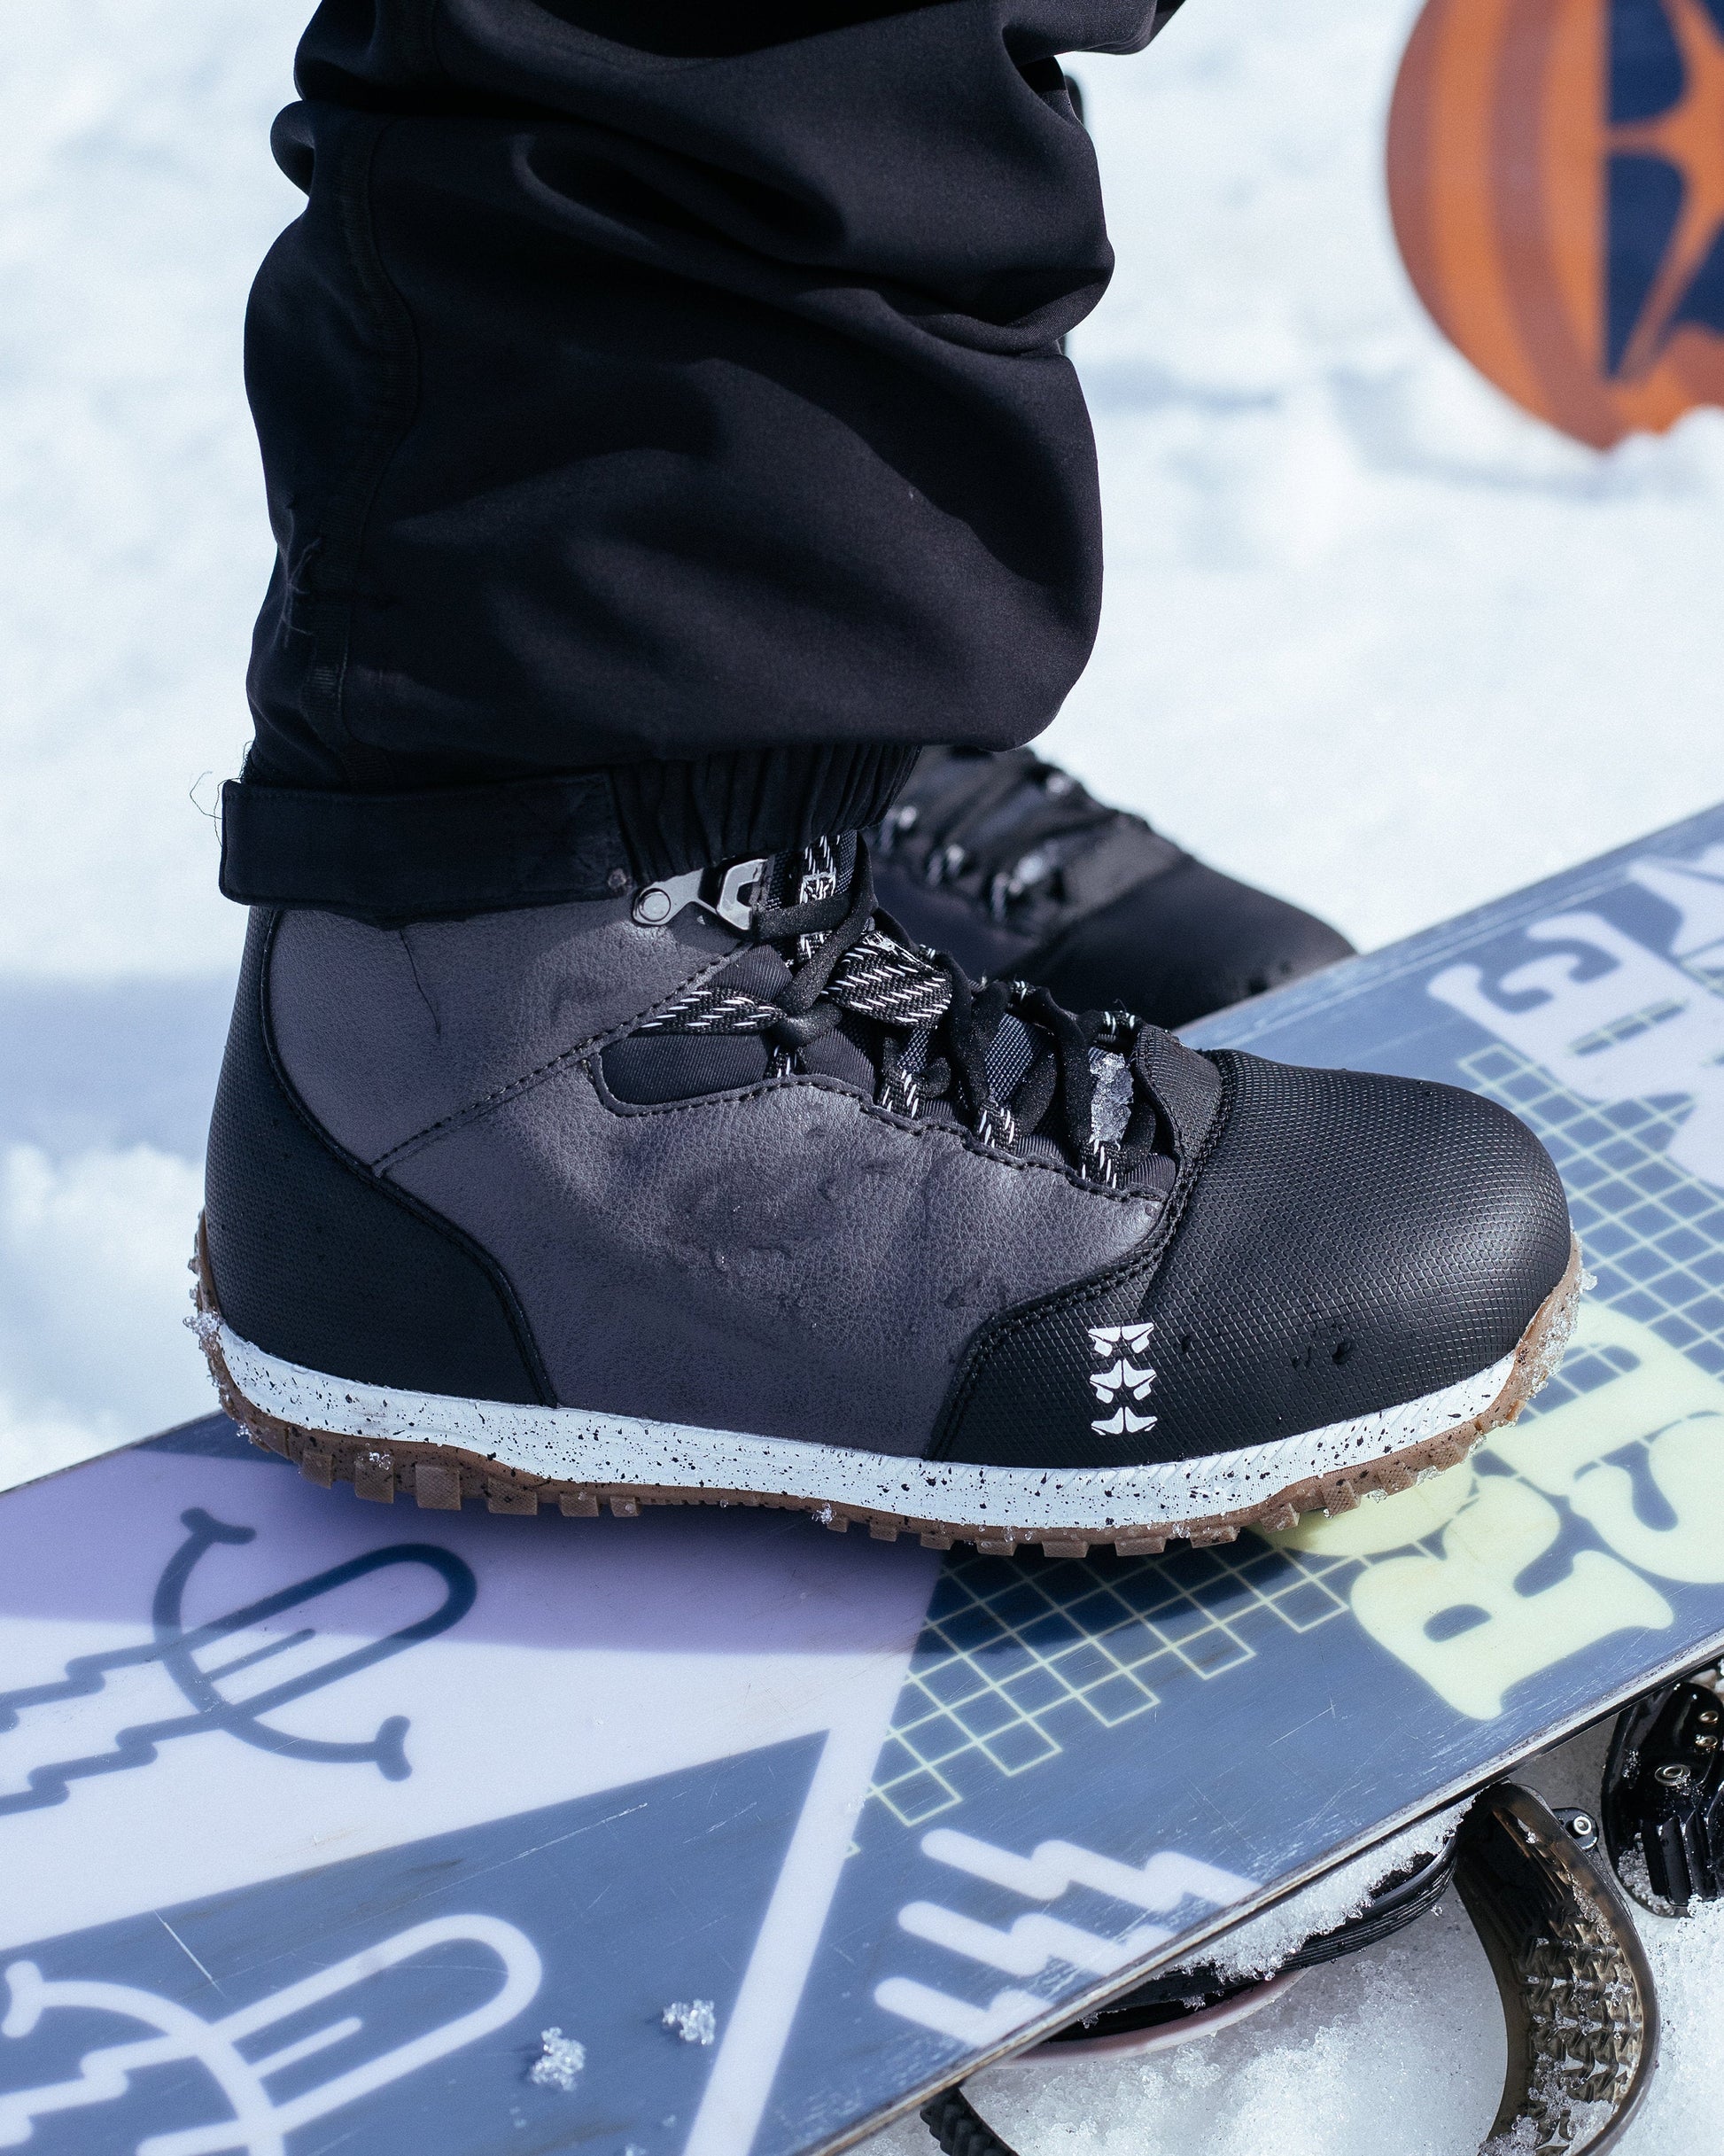 bodega shoes 2023-2024 rome sds snowboard boots product image